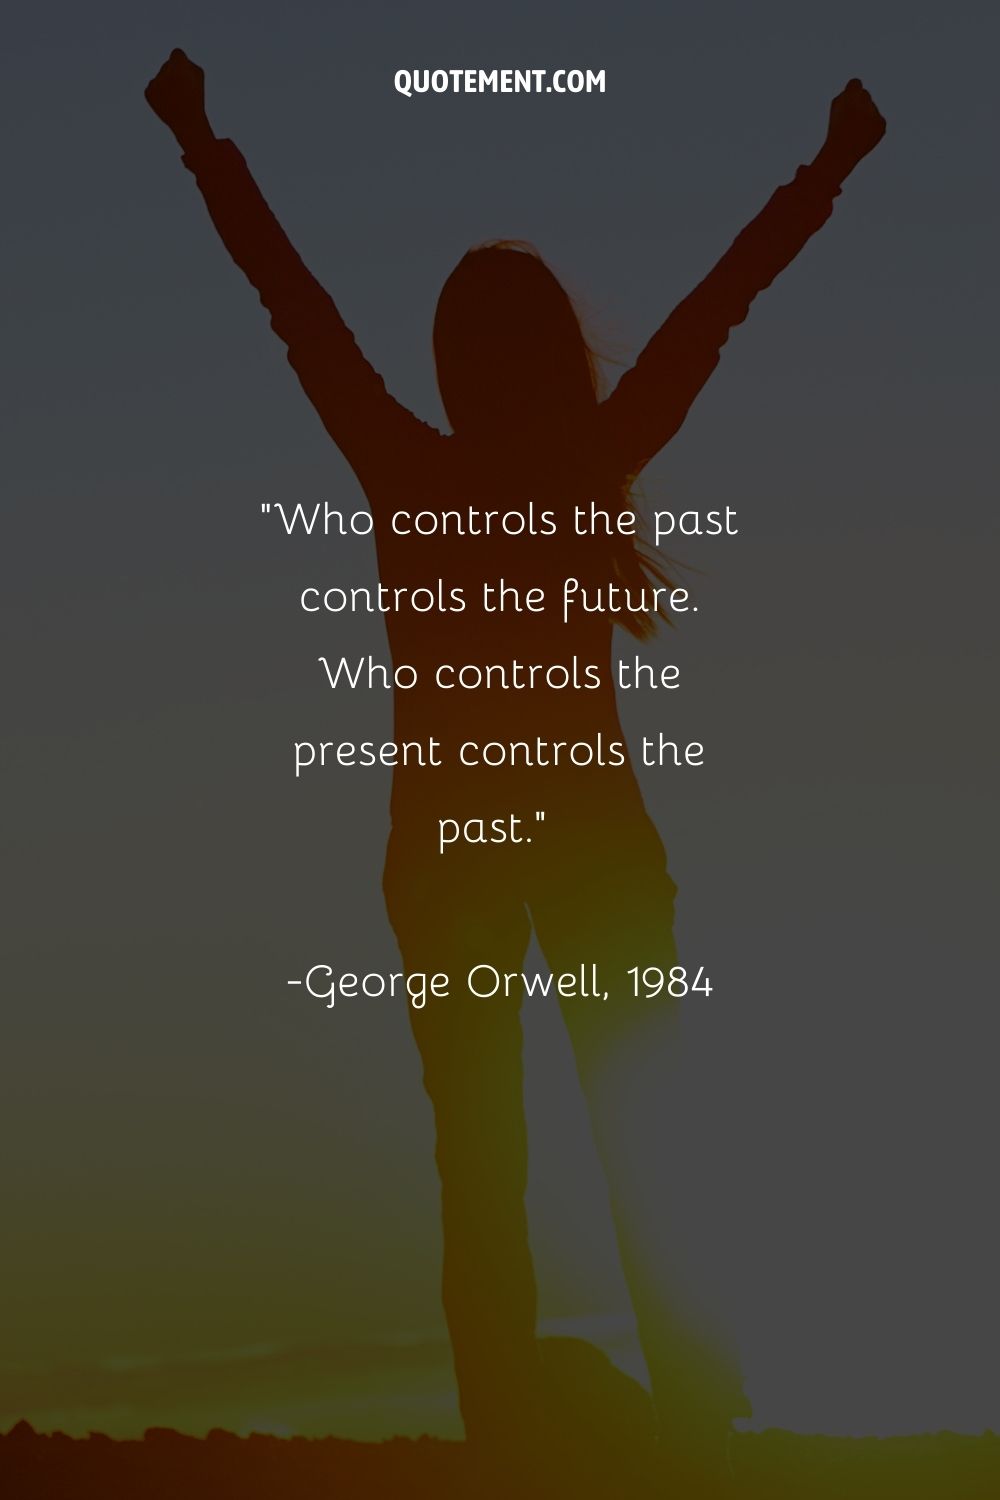 Who controls the past controls the future.